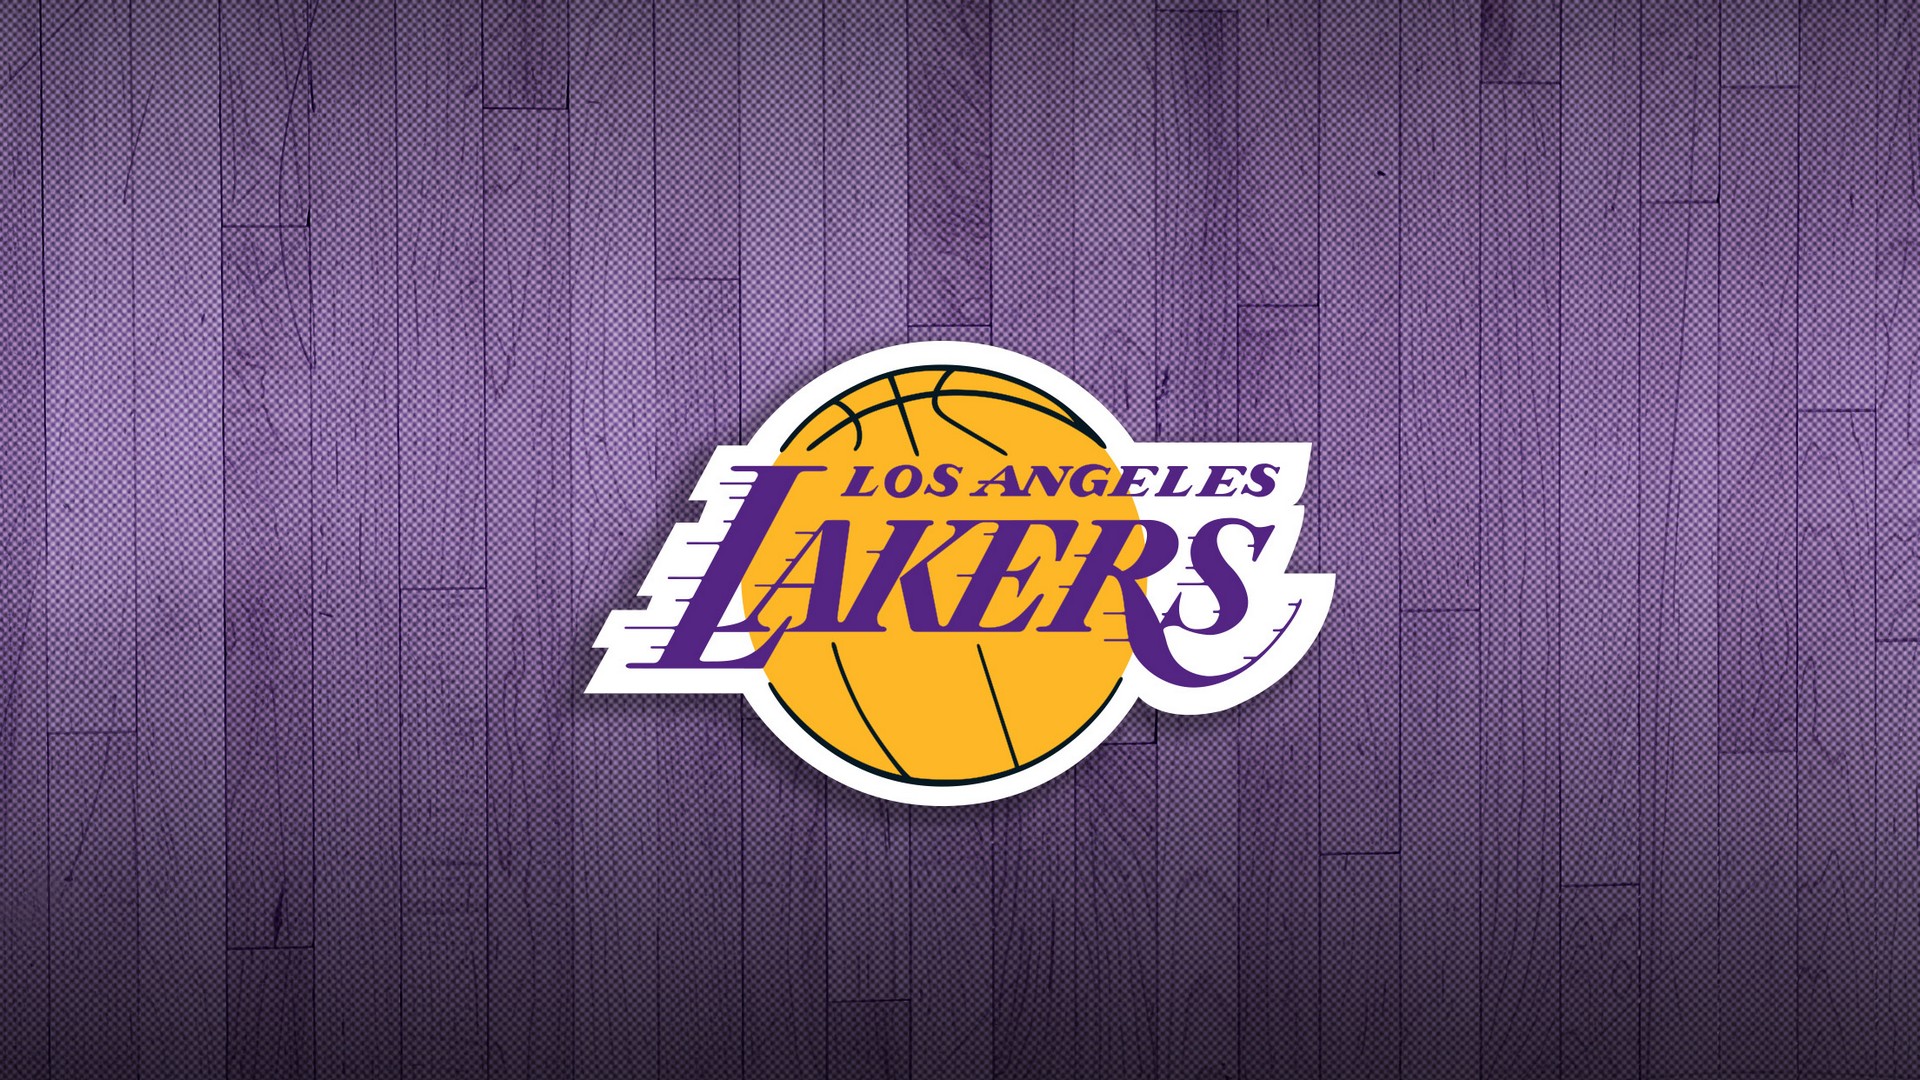 Los Angeles Lakers Desktop Wallpapers With Image Dimensions - Angeles Lakers - HD Wallpaper 